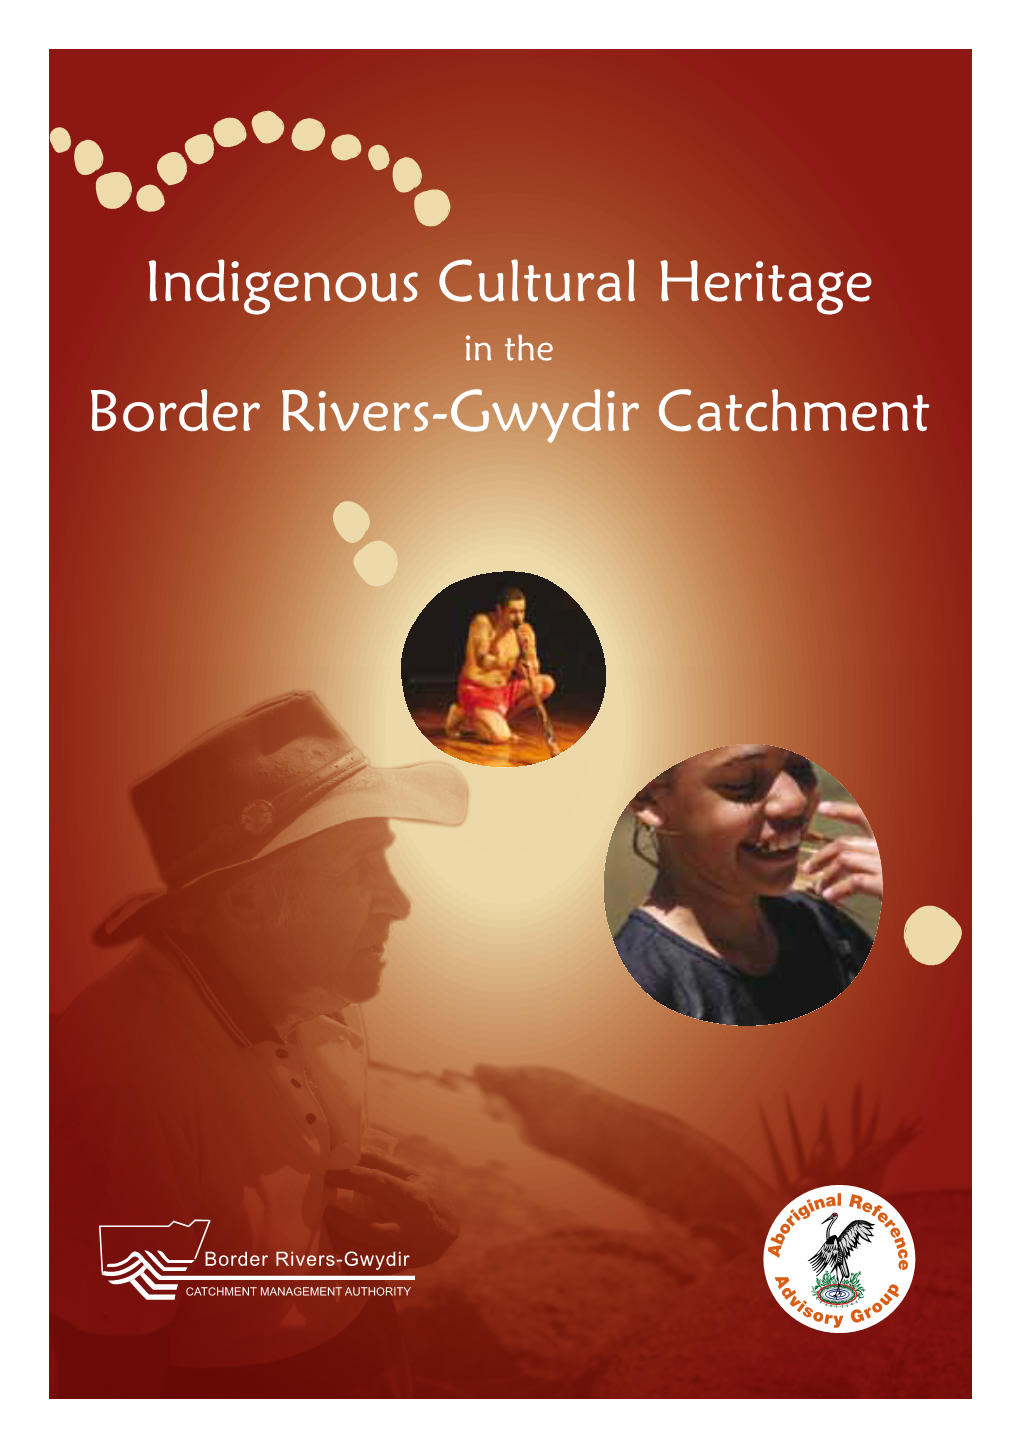 Indigenous Cultural Heritage in the Border Rivers-Gwydir Catchment